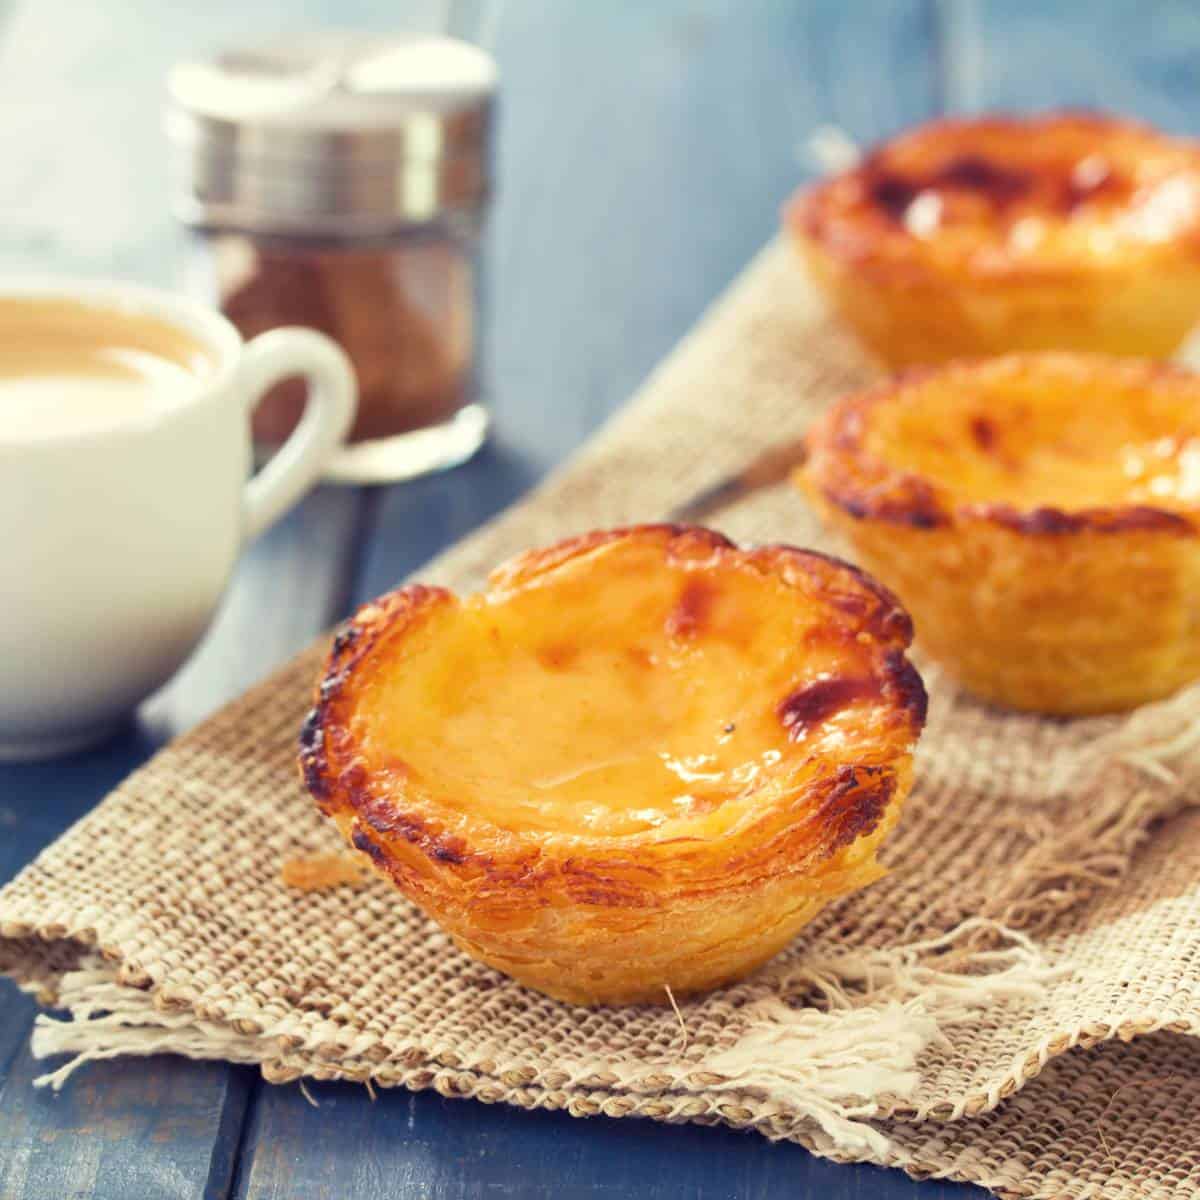 Enjoy a delicious brunch in Lisbon with an assortment of traditional Portuguese pastries displayed beautifully on a rustic wooden table. As you sip on a steaming cup of coffee, immerse yourself in